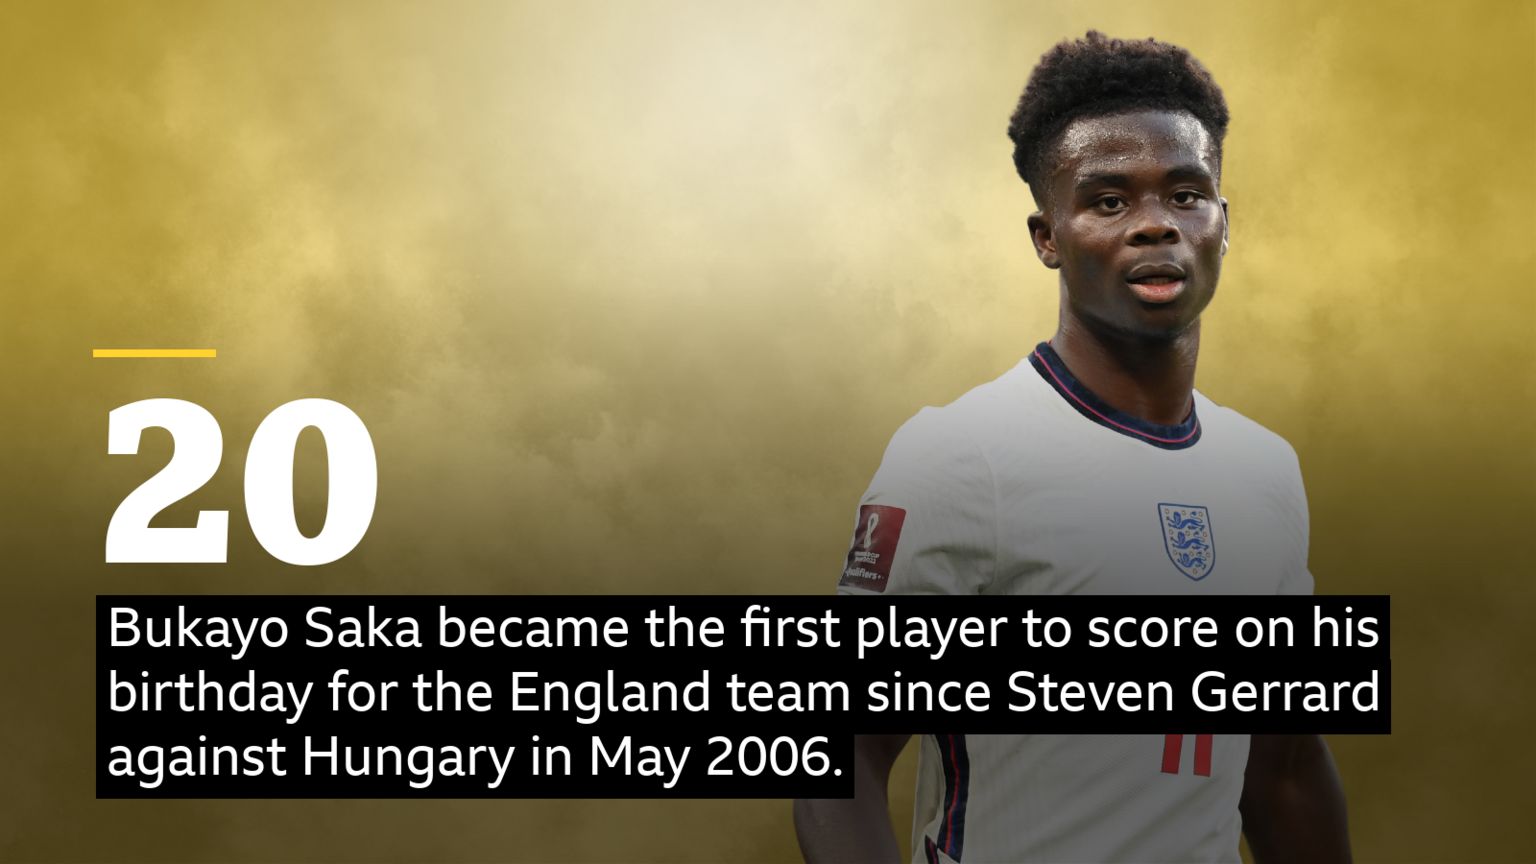 Bukayo Saka became the first player to score on his birthday for the senior men's England team since Steven Gerrard against Hungary in May 2006.